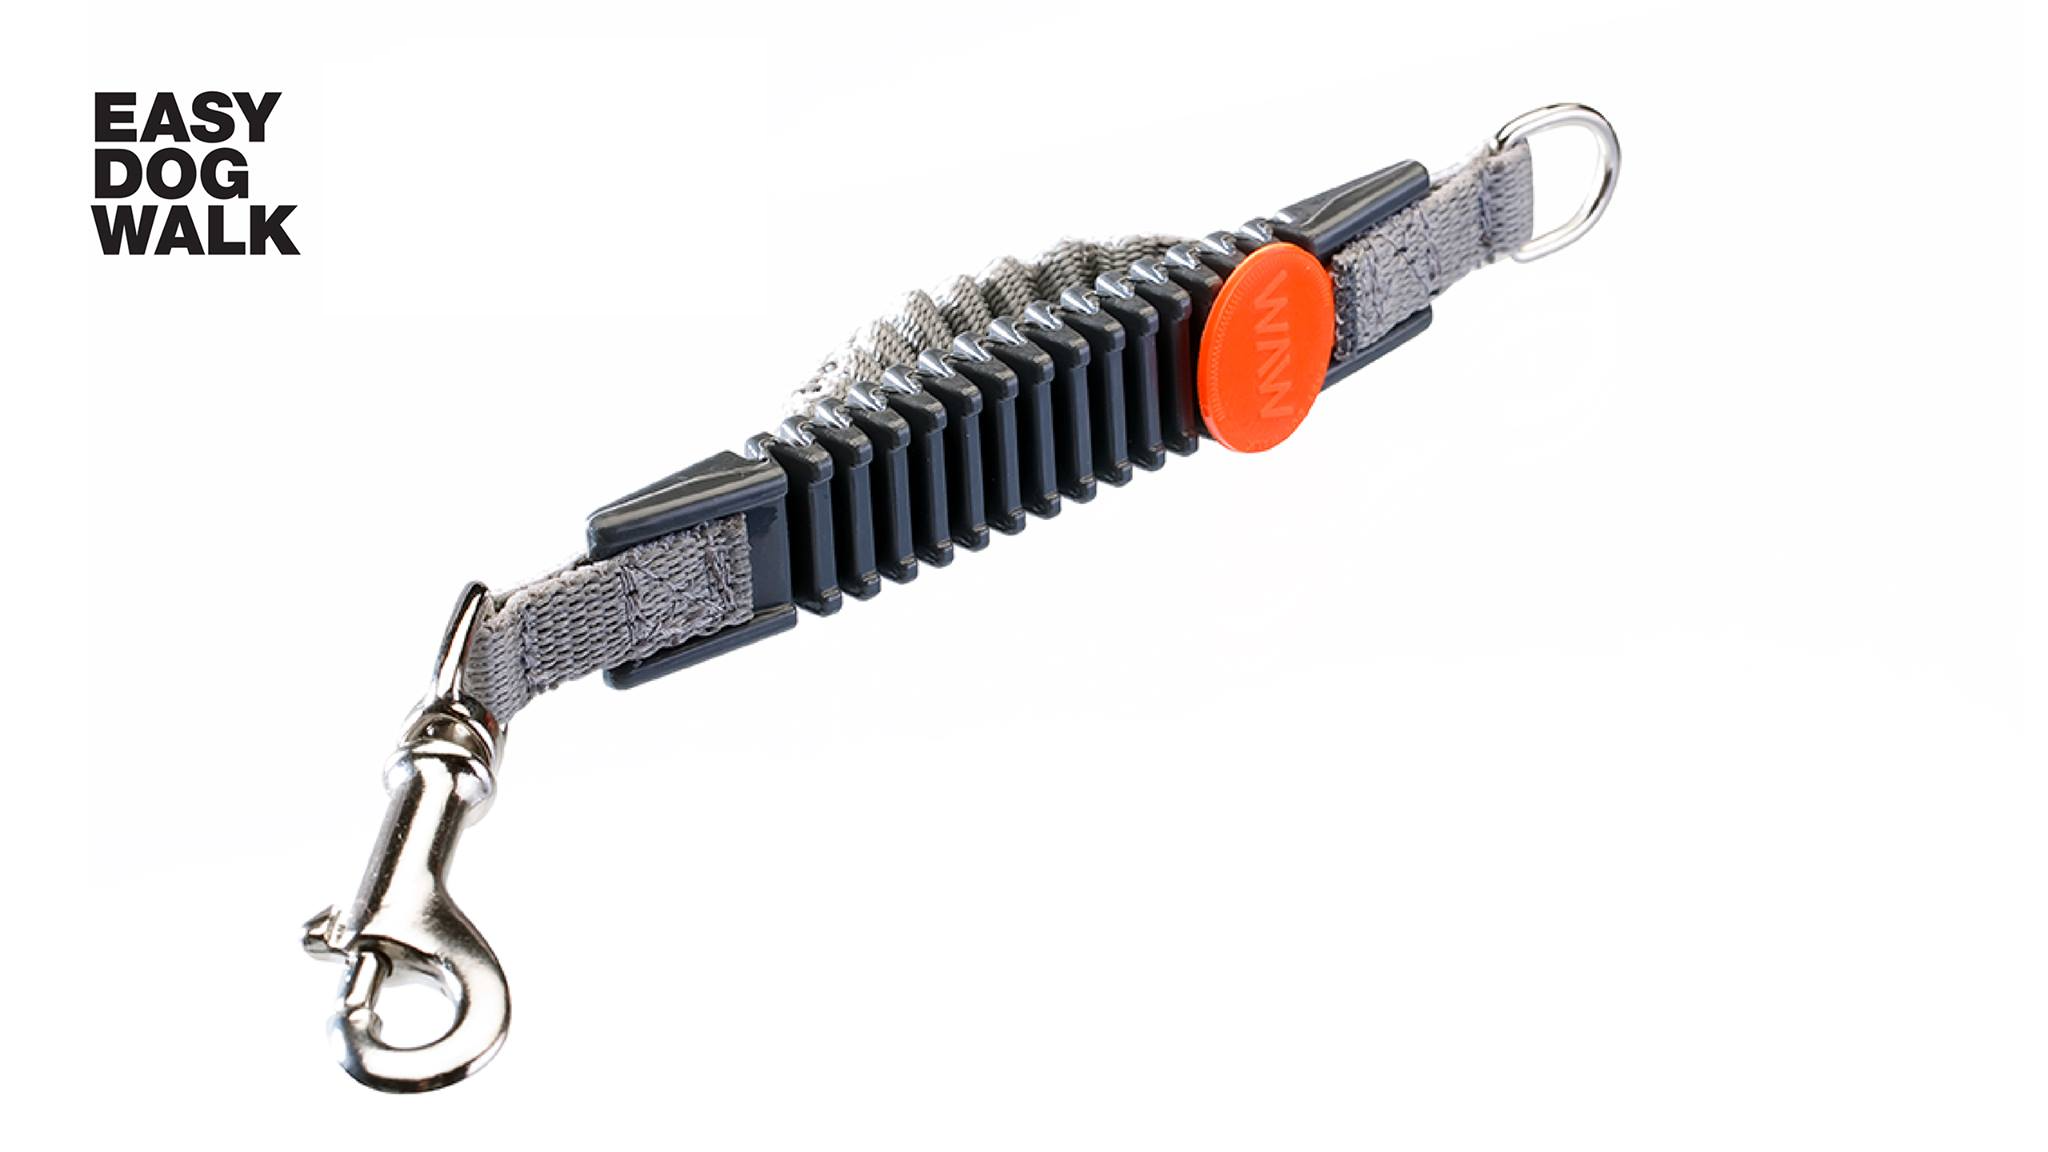 WAW - The Easy Dog Walk Shock Absorber